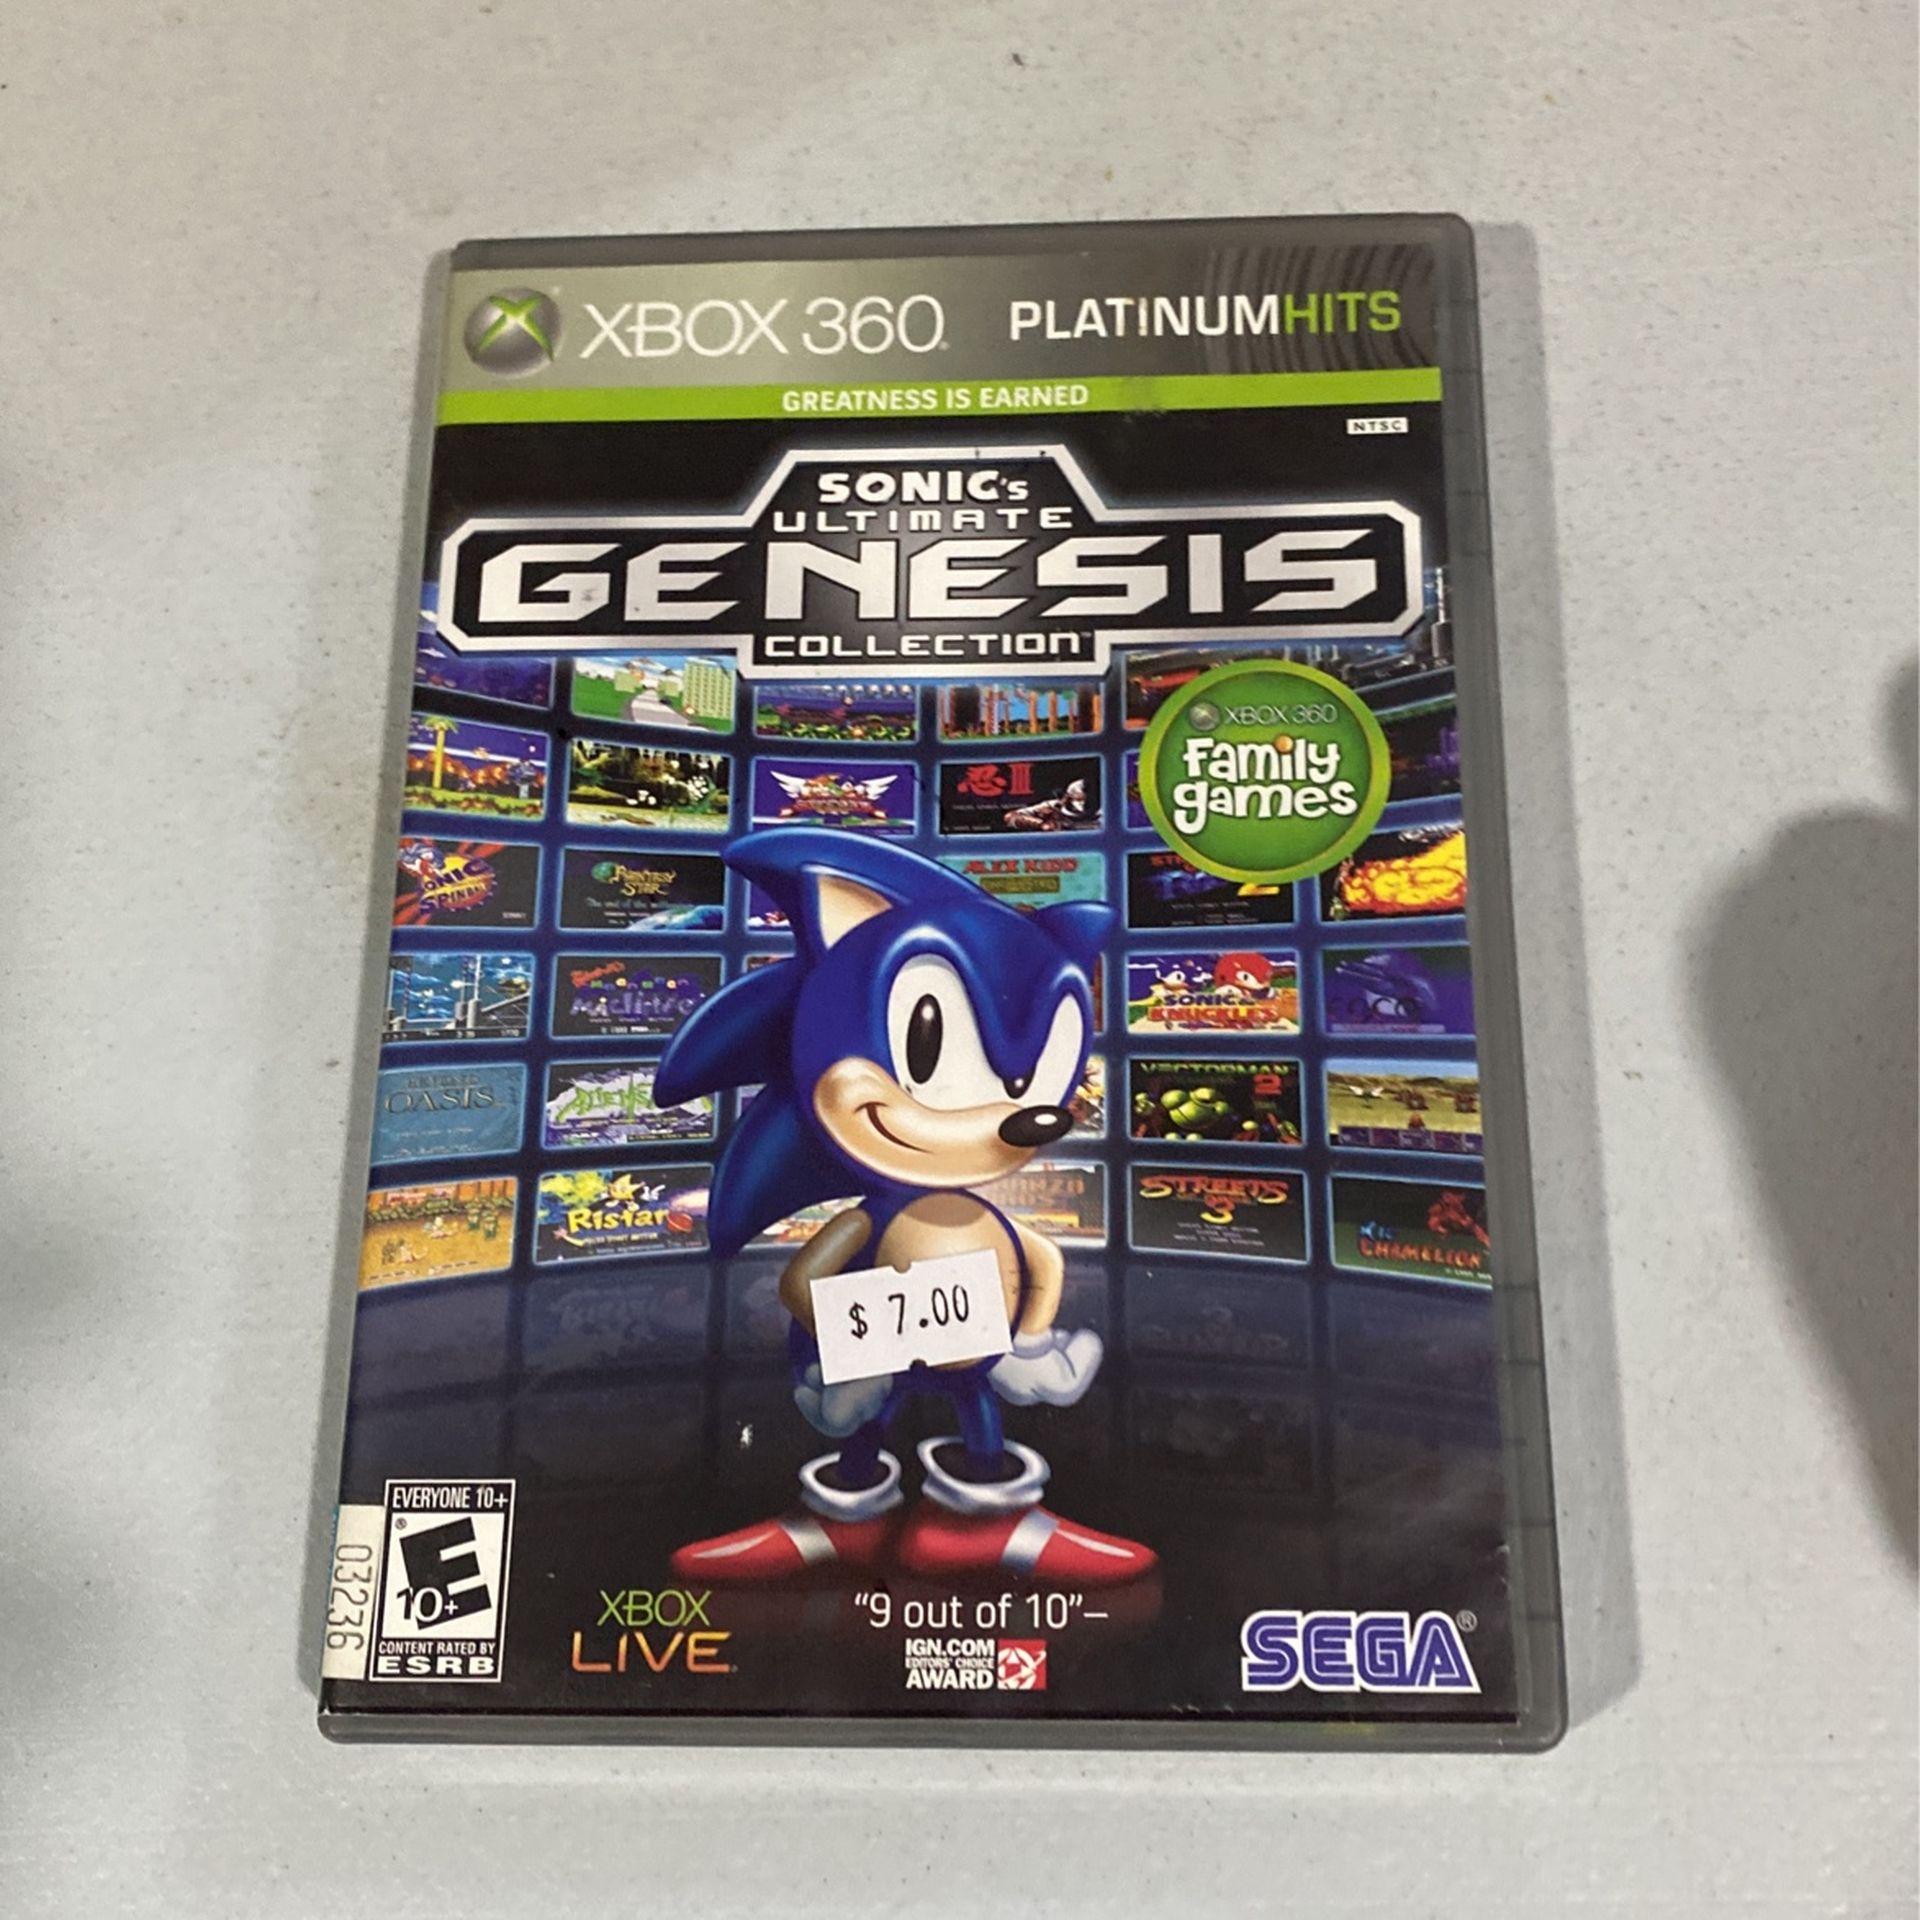 Sonic's Ultimate Genesis Collection (Microsoft Xbox 360, 2009)